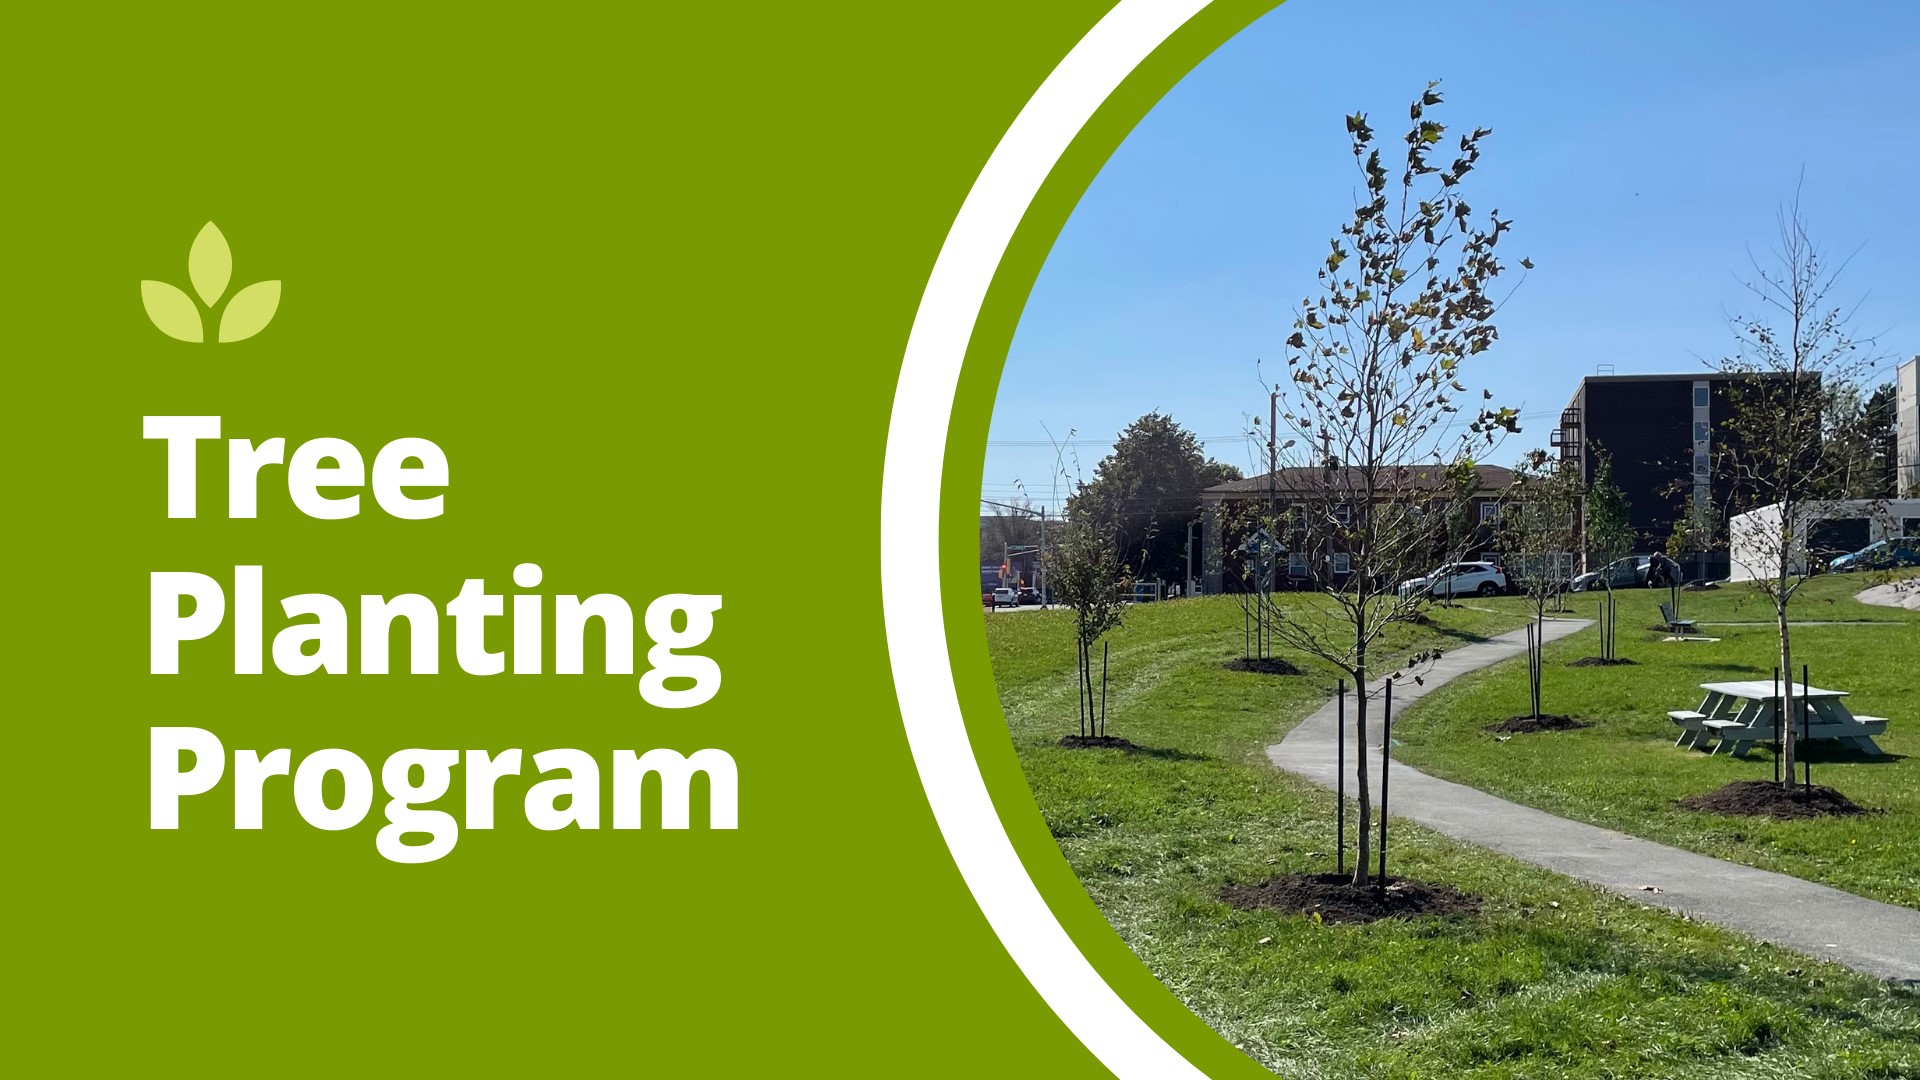 the words "tree planting program" next to an image of greenspace and a path with trees planted along it